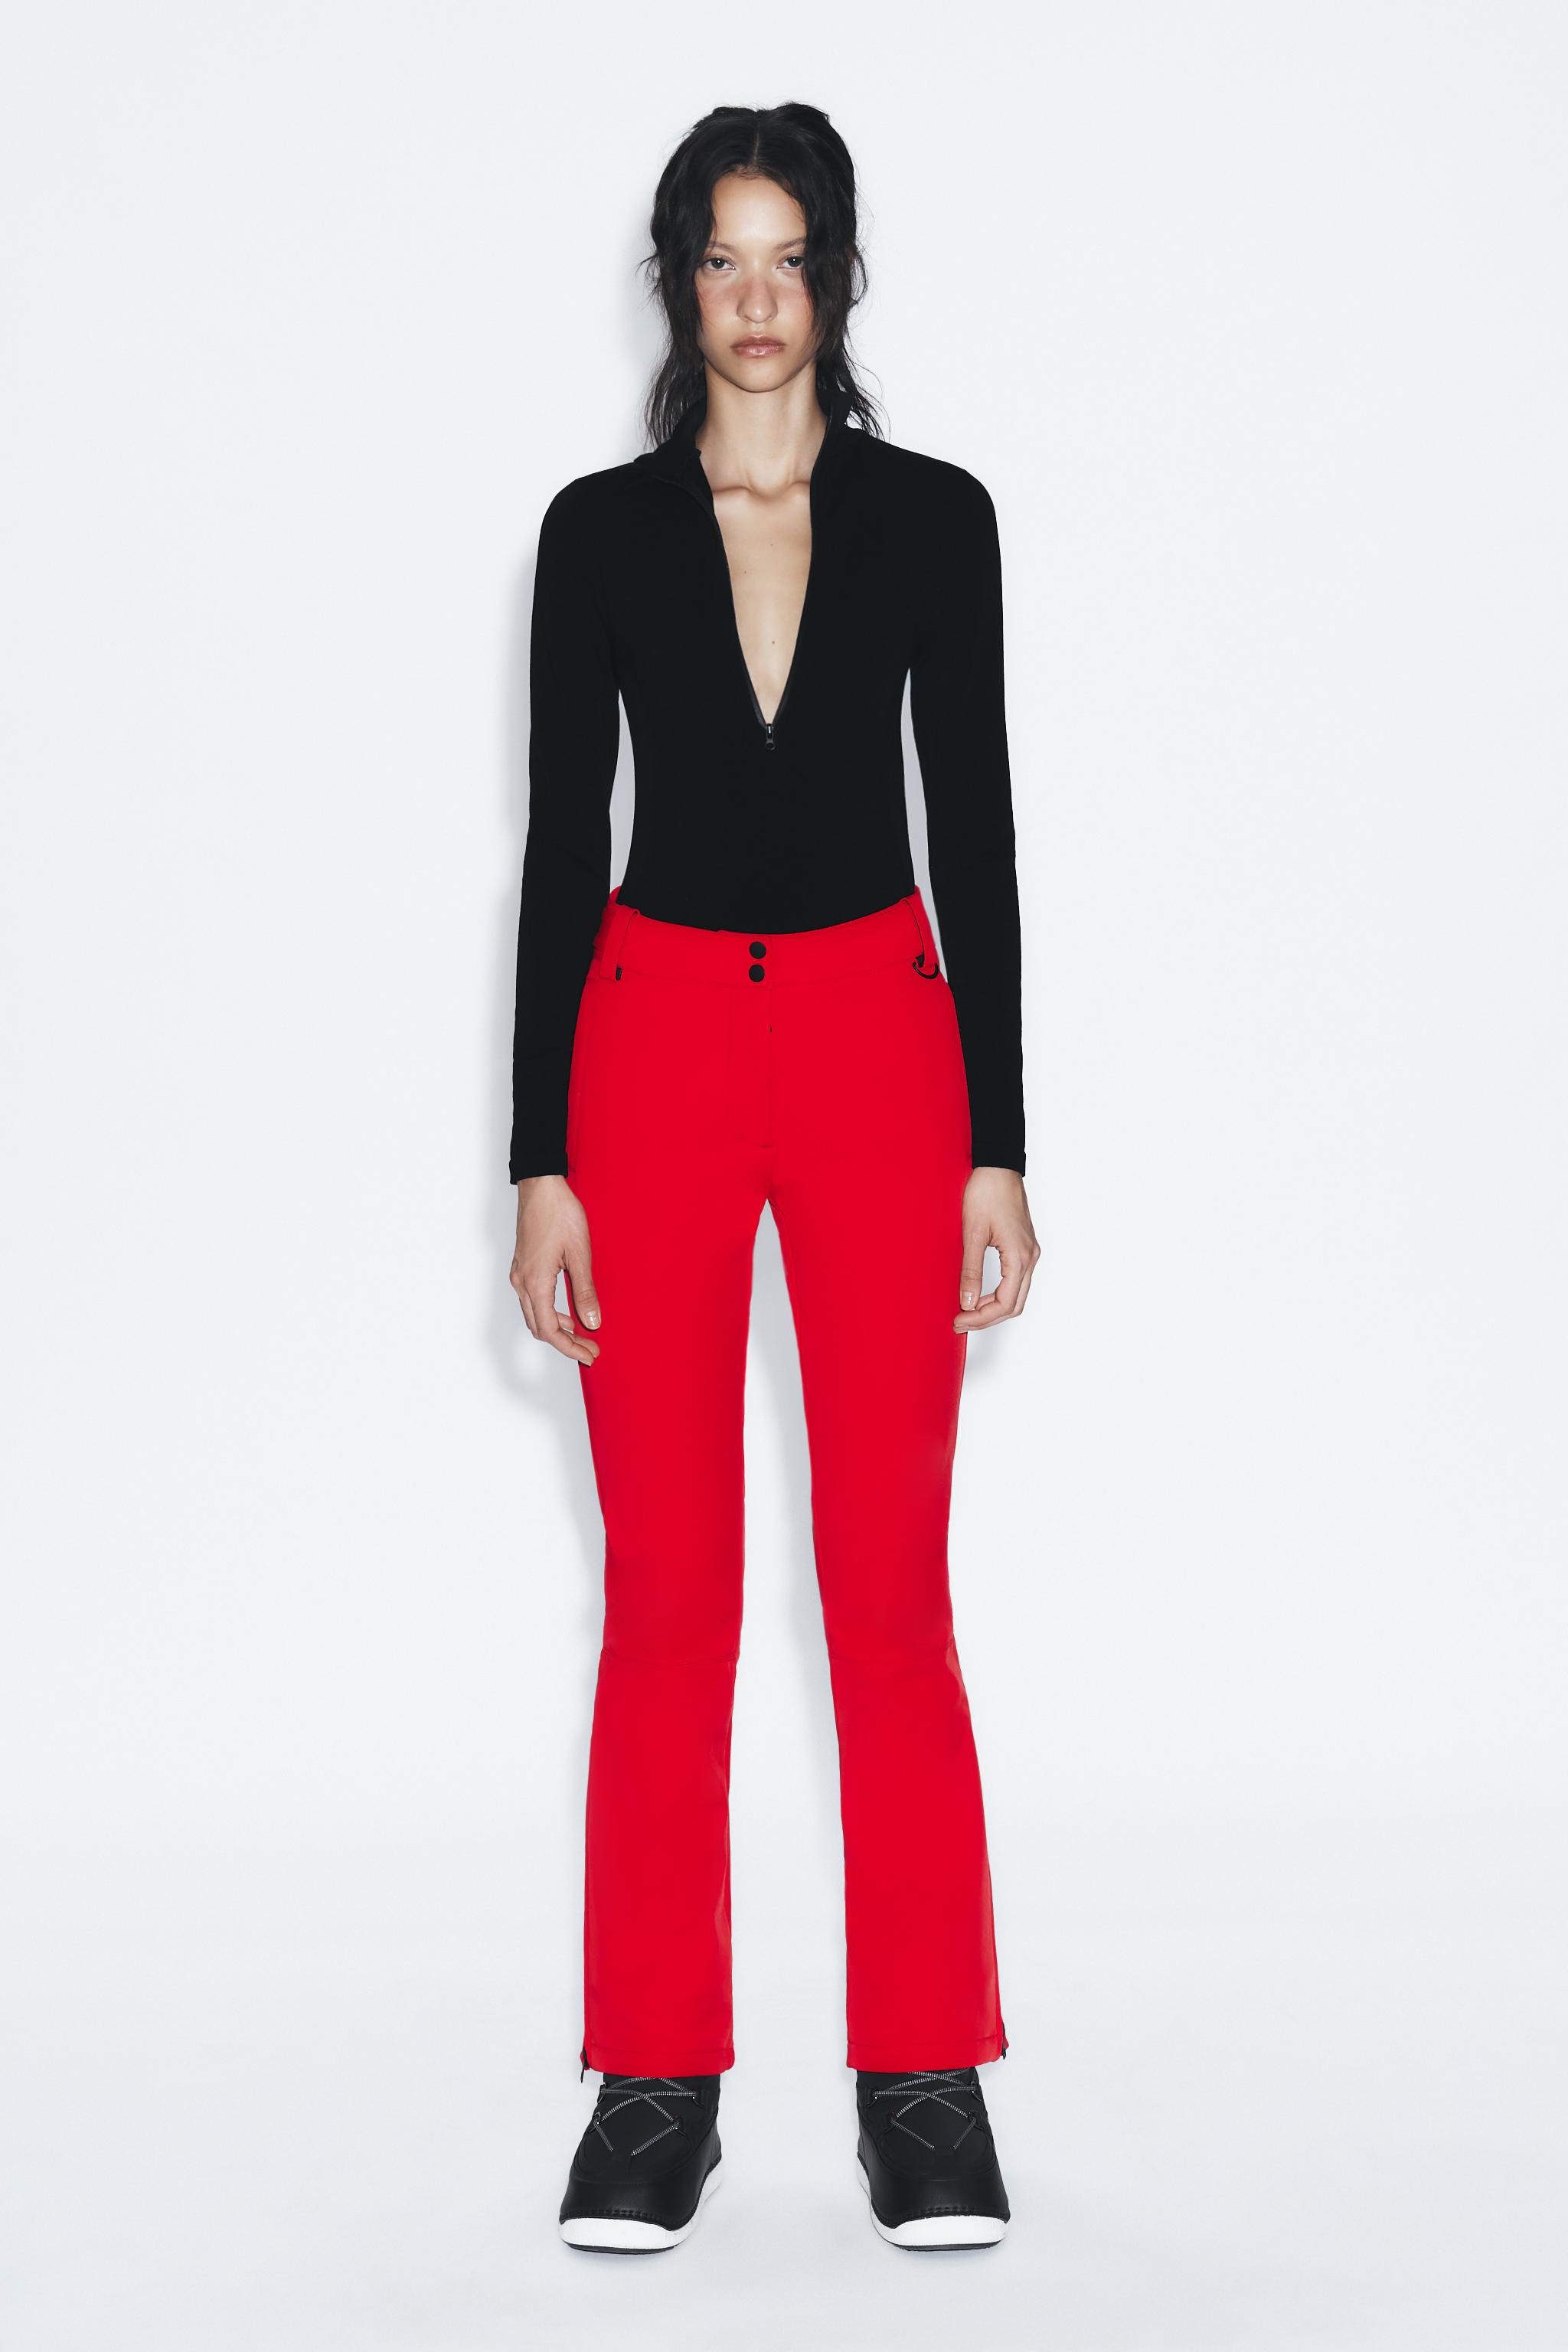 Zara New Bloggers Fav Red Low Rise Formal Pants Limited Studio Edition Size  M